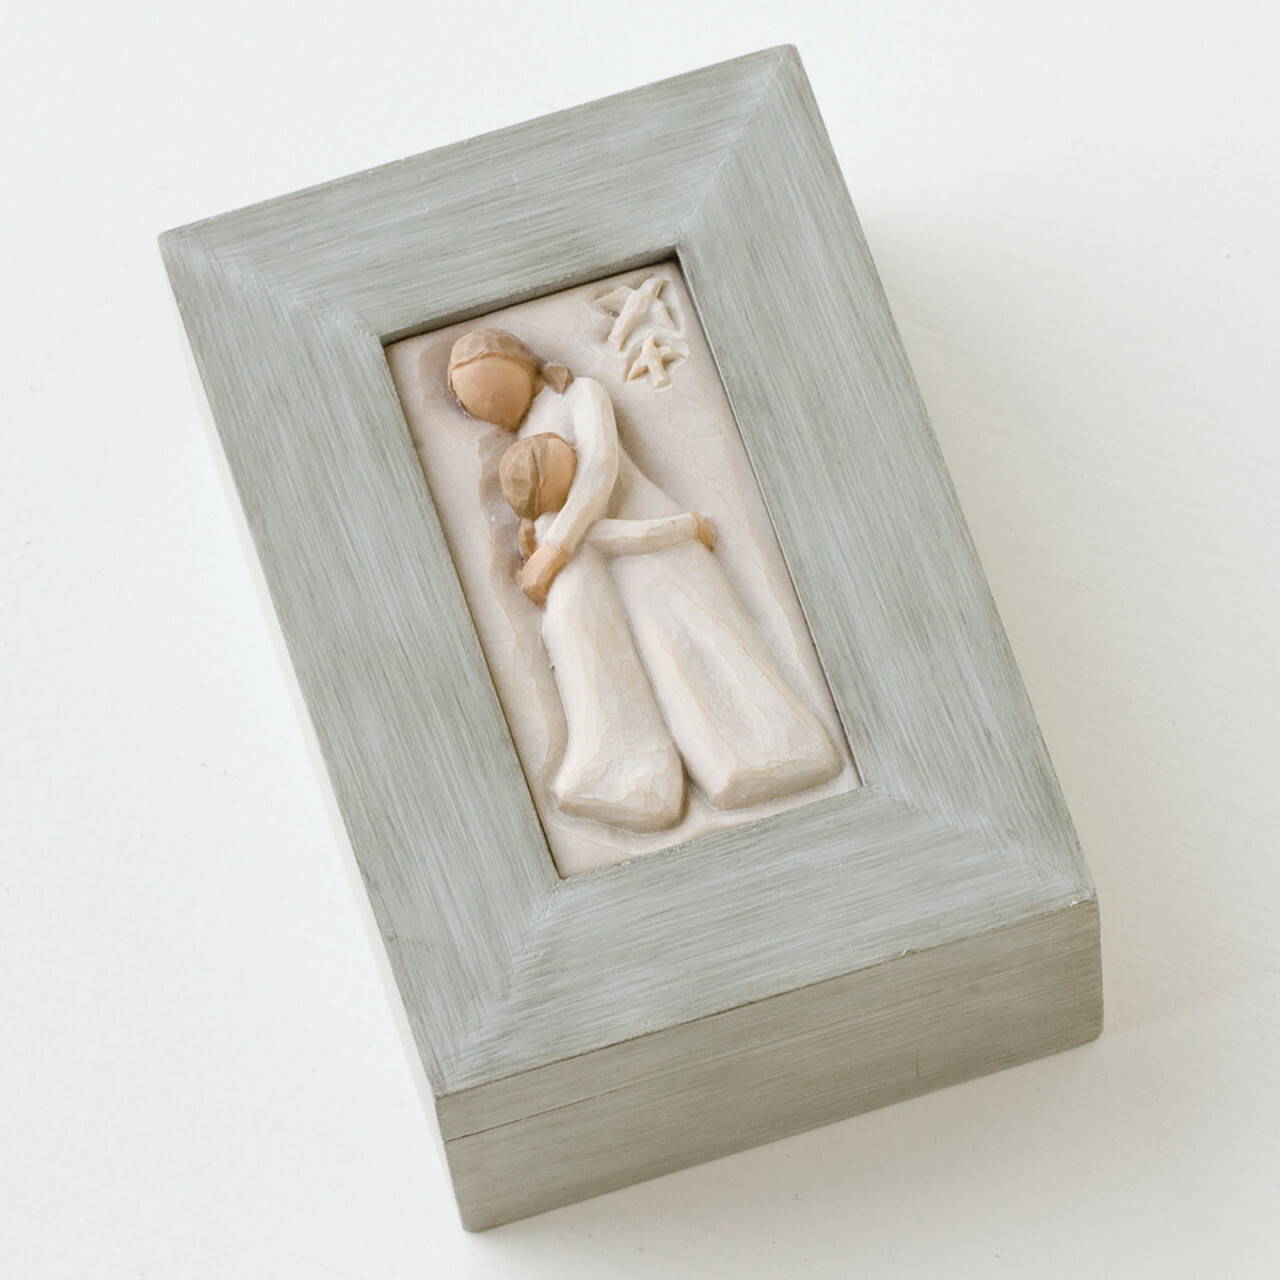 a Finely crafted hand-painted wood box carving of embracing adult and child in cream dresses on the lid is one of the best gift for mom